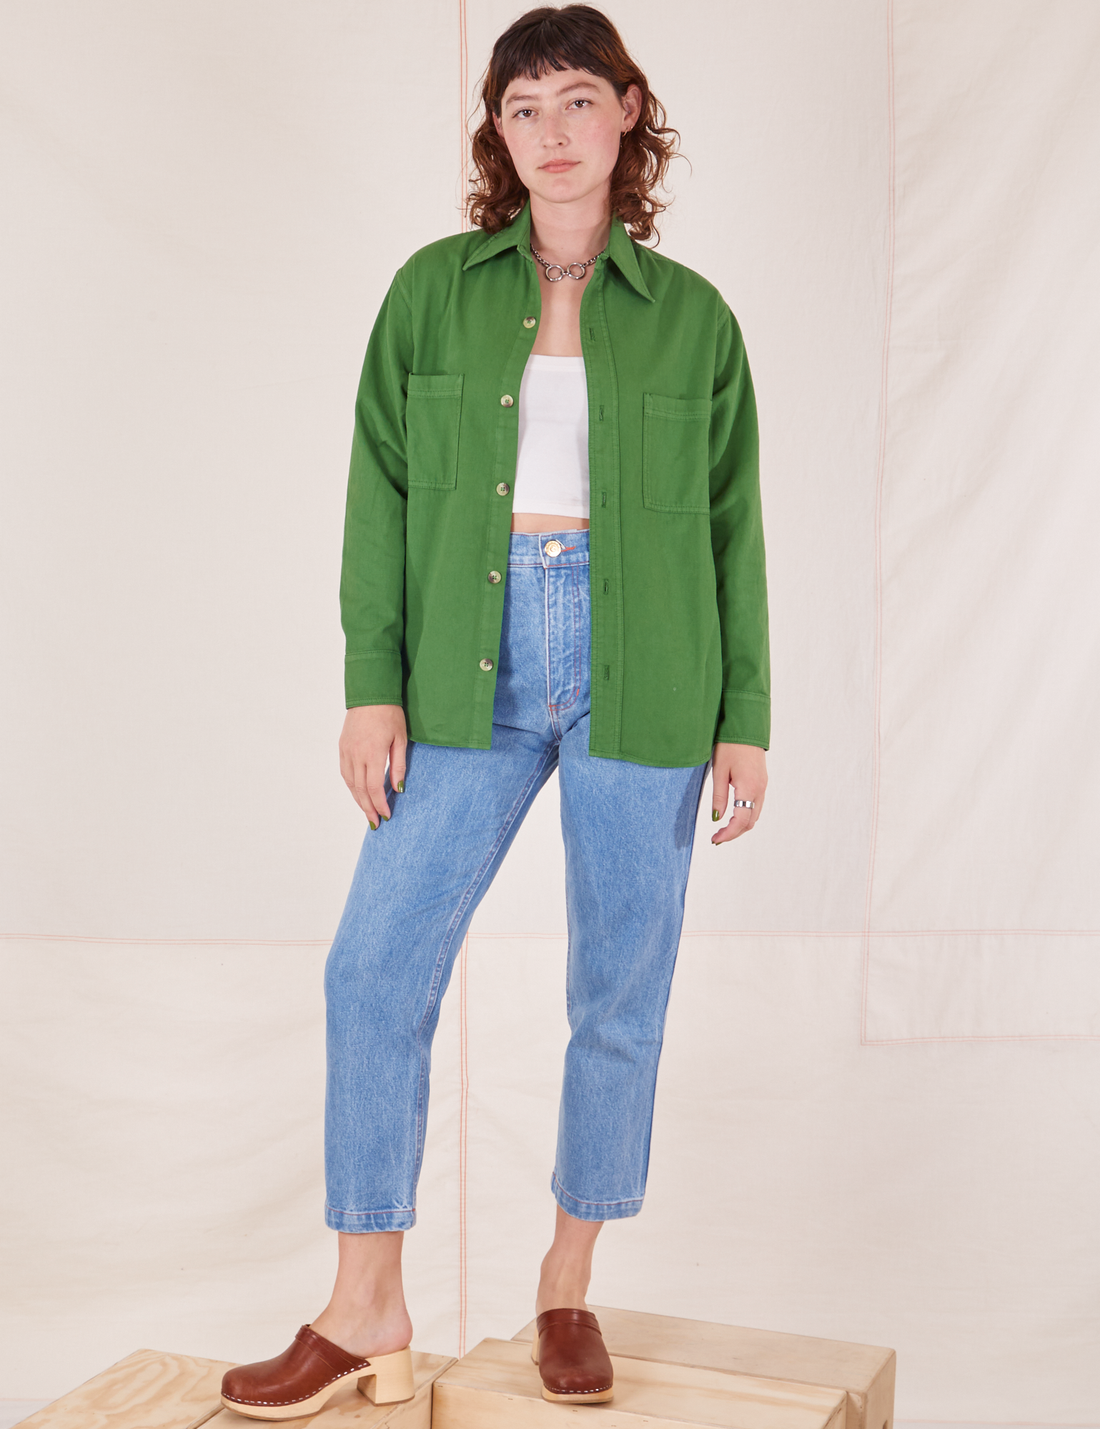 Alex is wearing Oversize Overshirt in Lawn Green, vintage off-white Tank Top and light wash Frontier Jeans